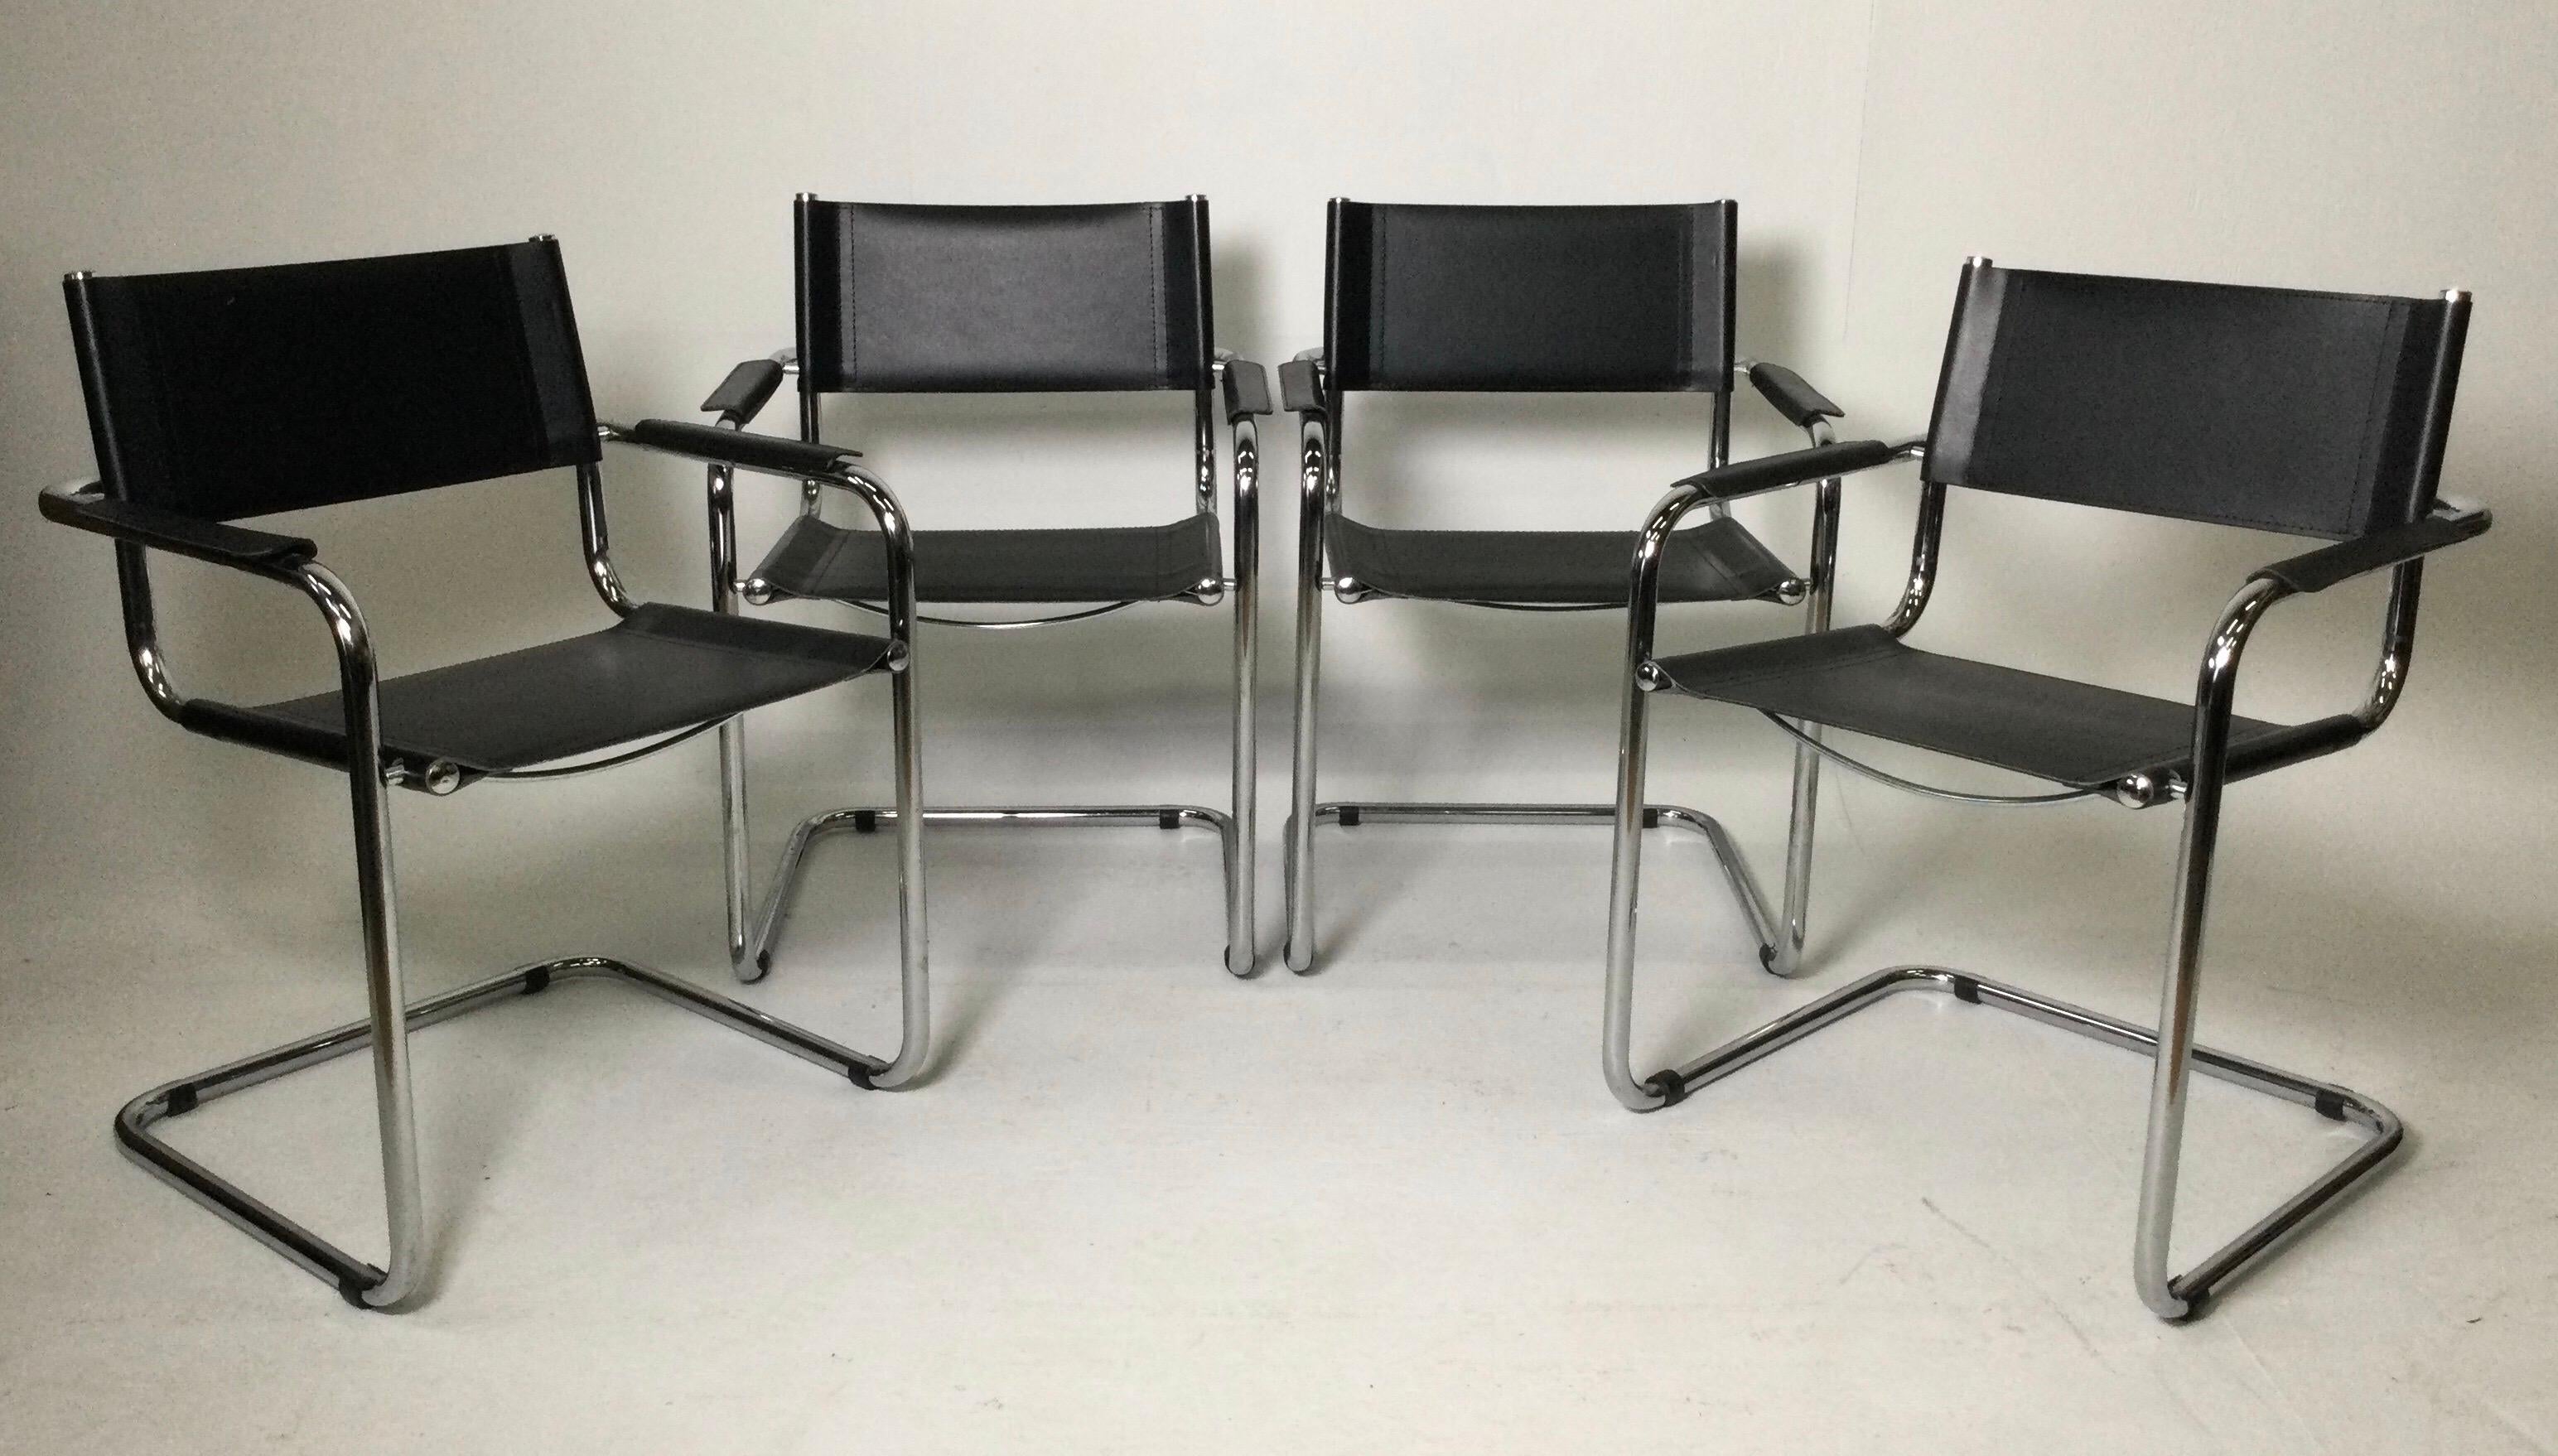 Italian Set of 4 Black Leather Chrome Plated Tubular Steel Cantilever Style Arm Chairs